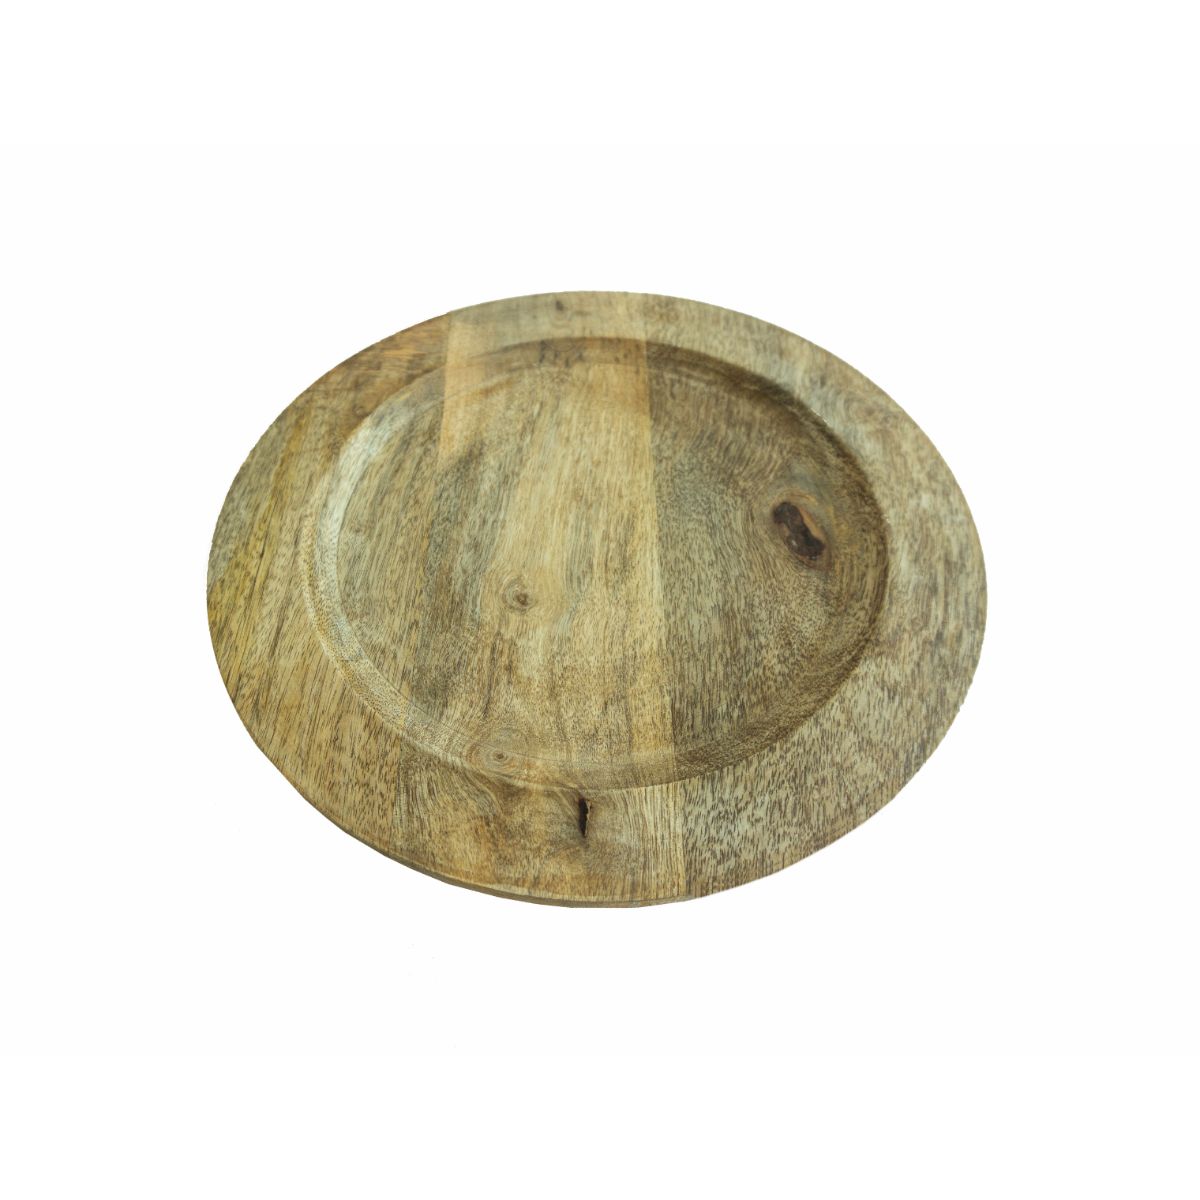  Wooden Charger Plate 